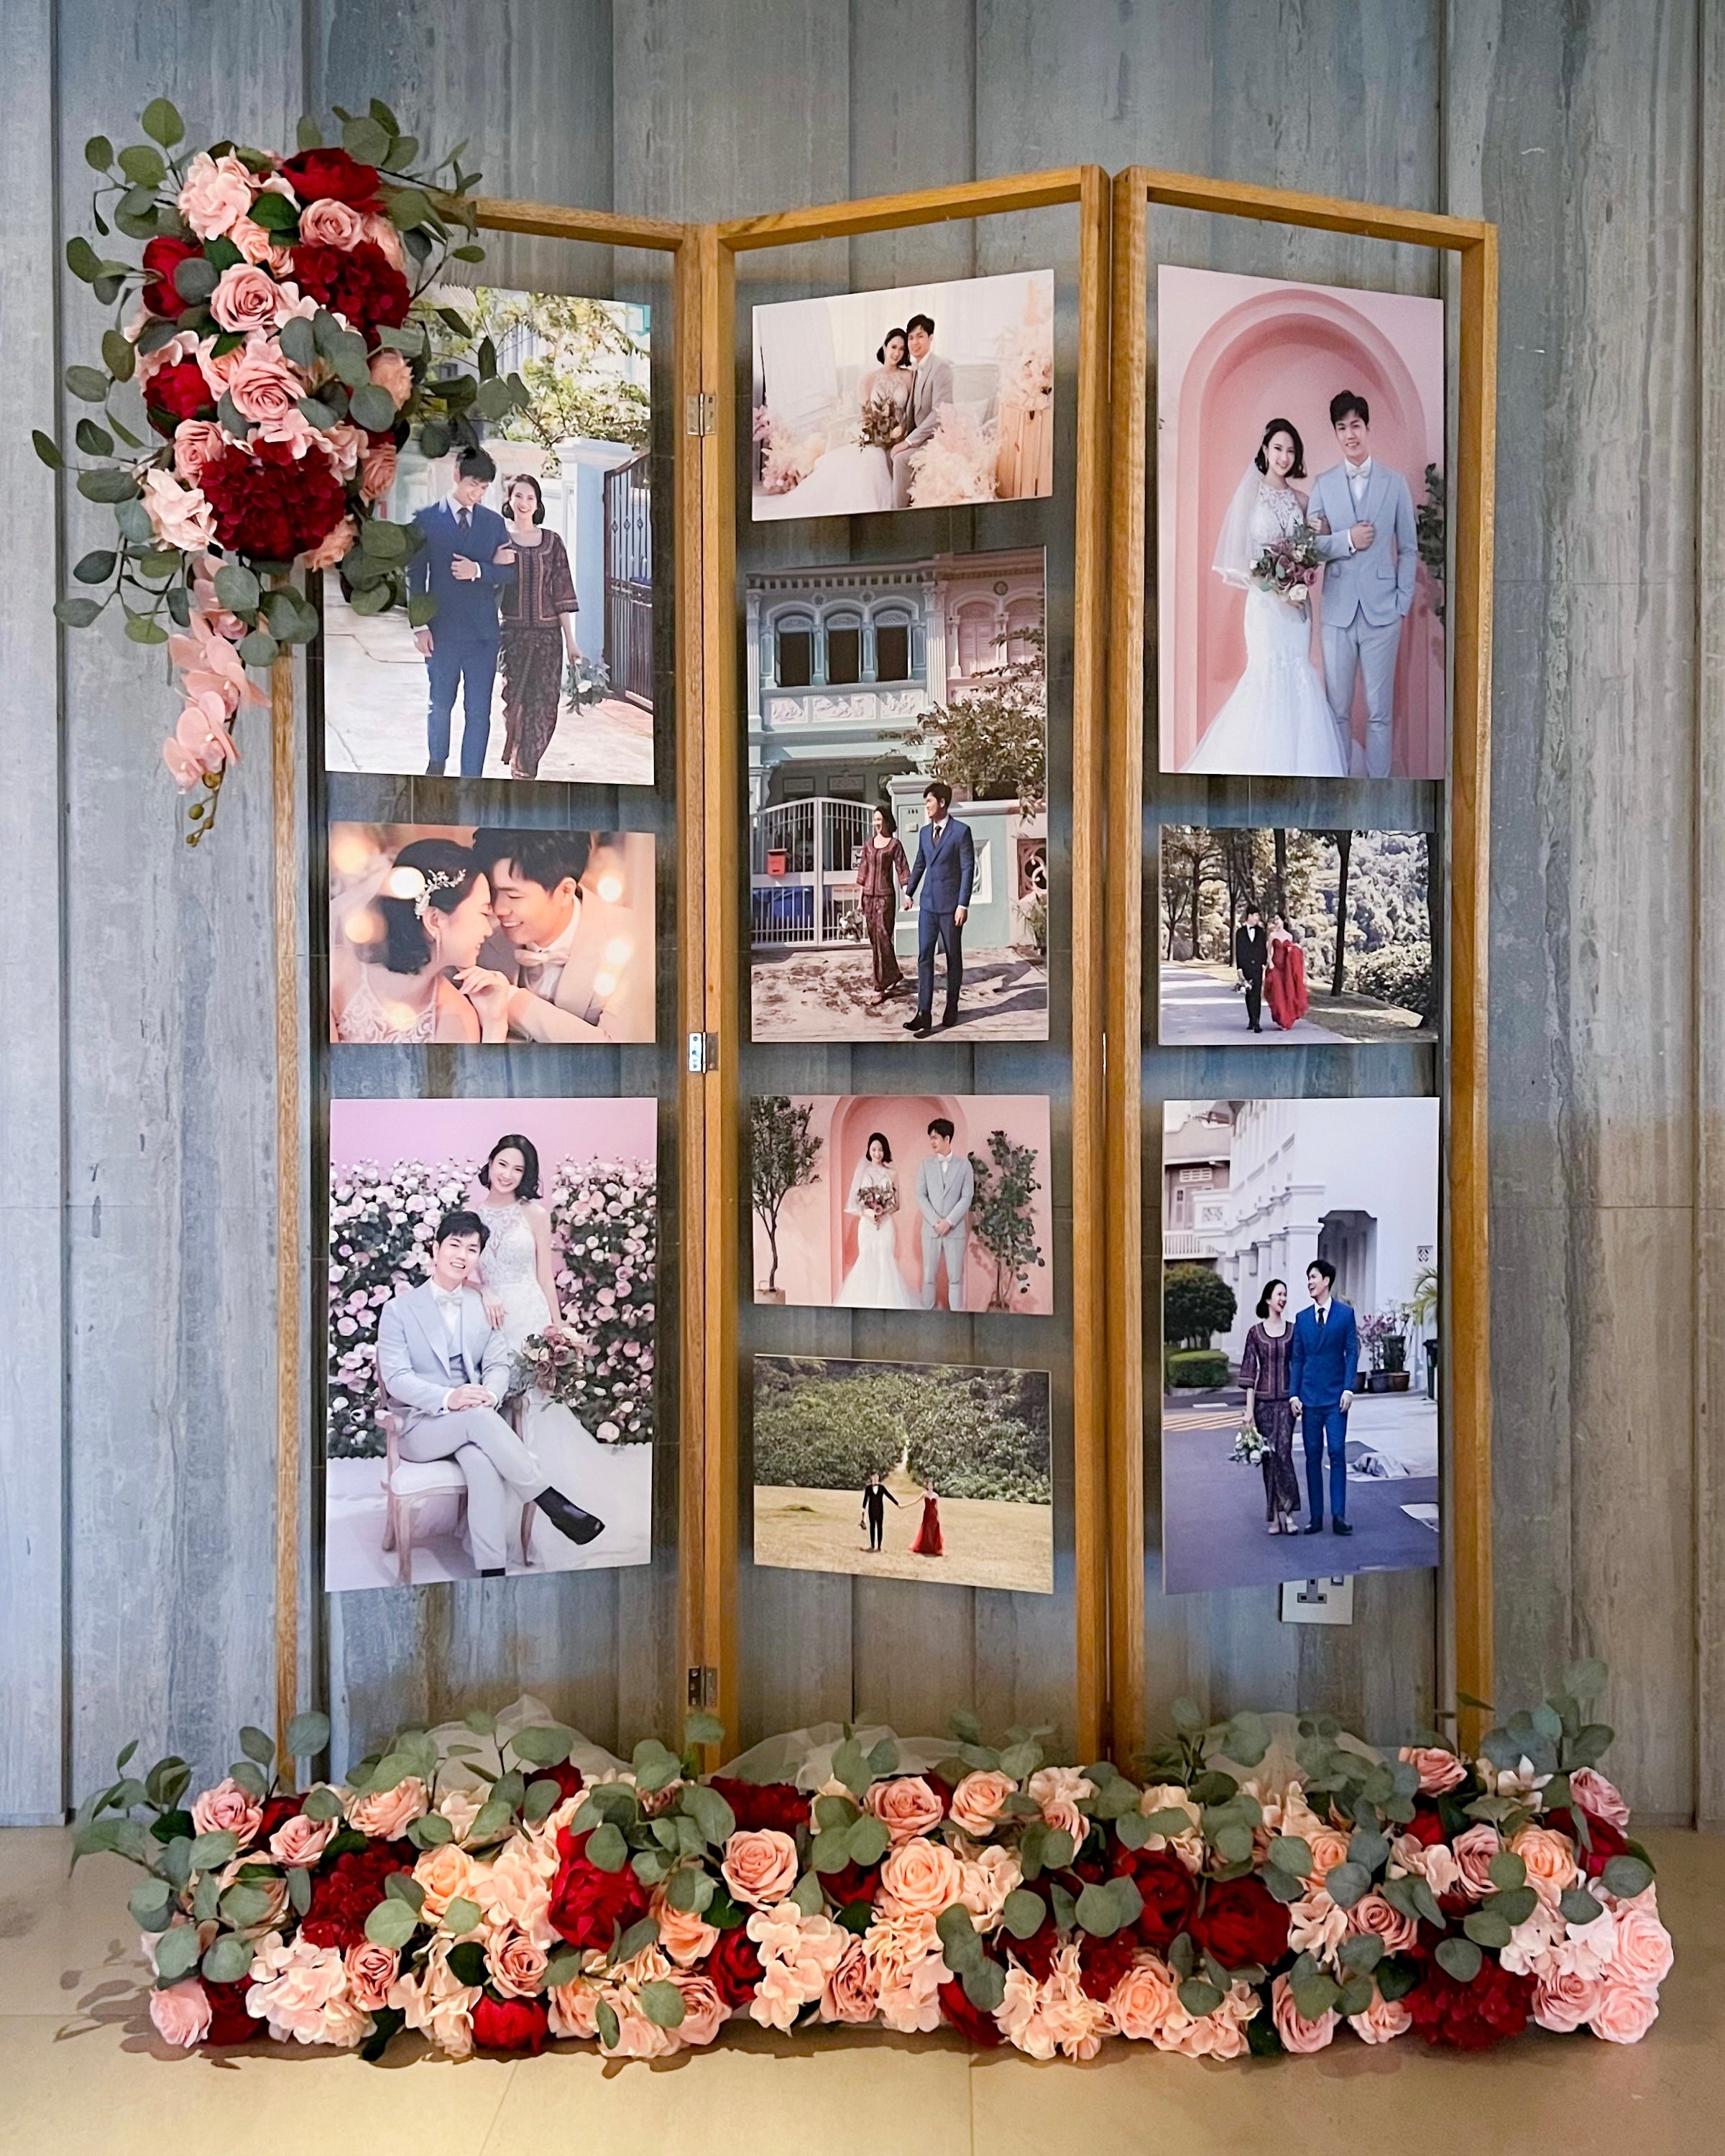 Affordable Wedding Reception Decor in Singapore - Rustic Photo Gallery with Pink & Red Florals (Venue: Andaz)